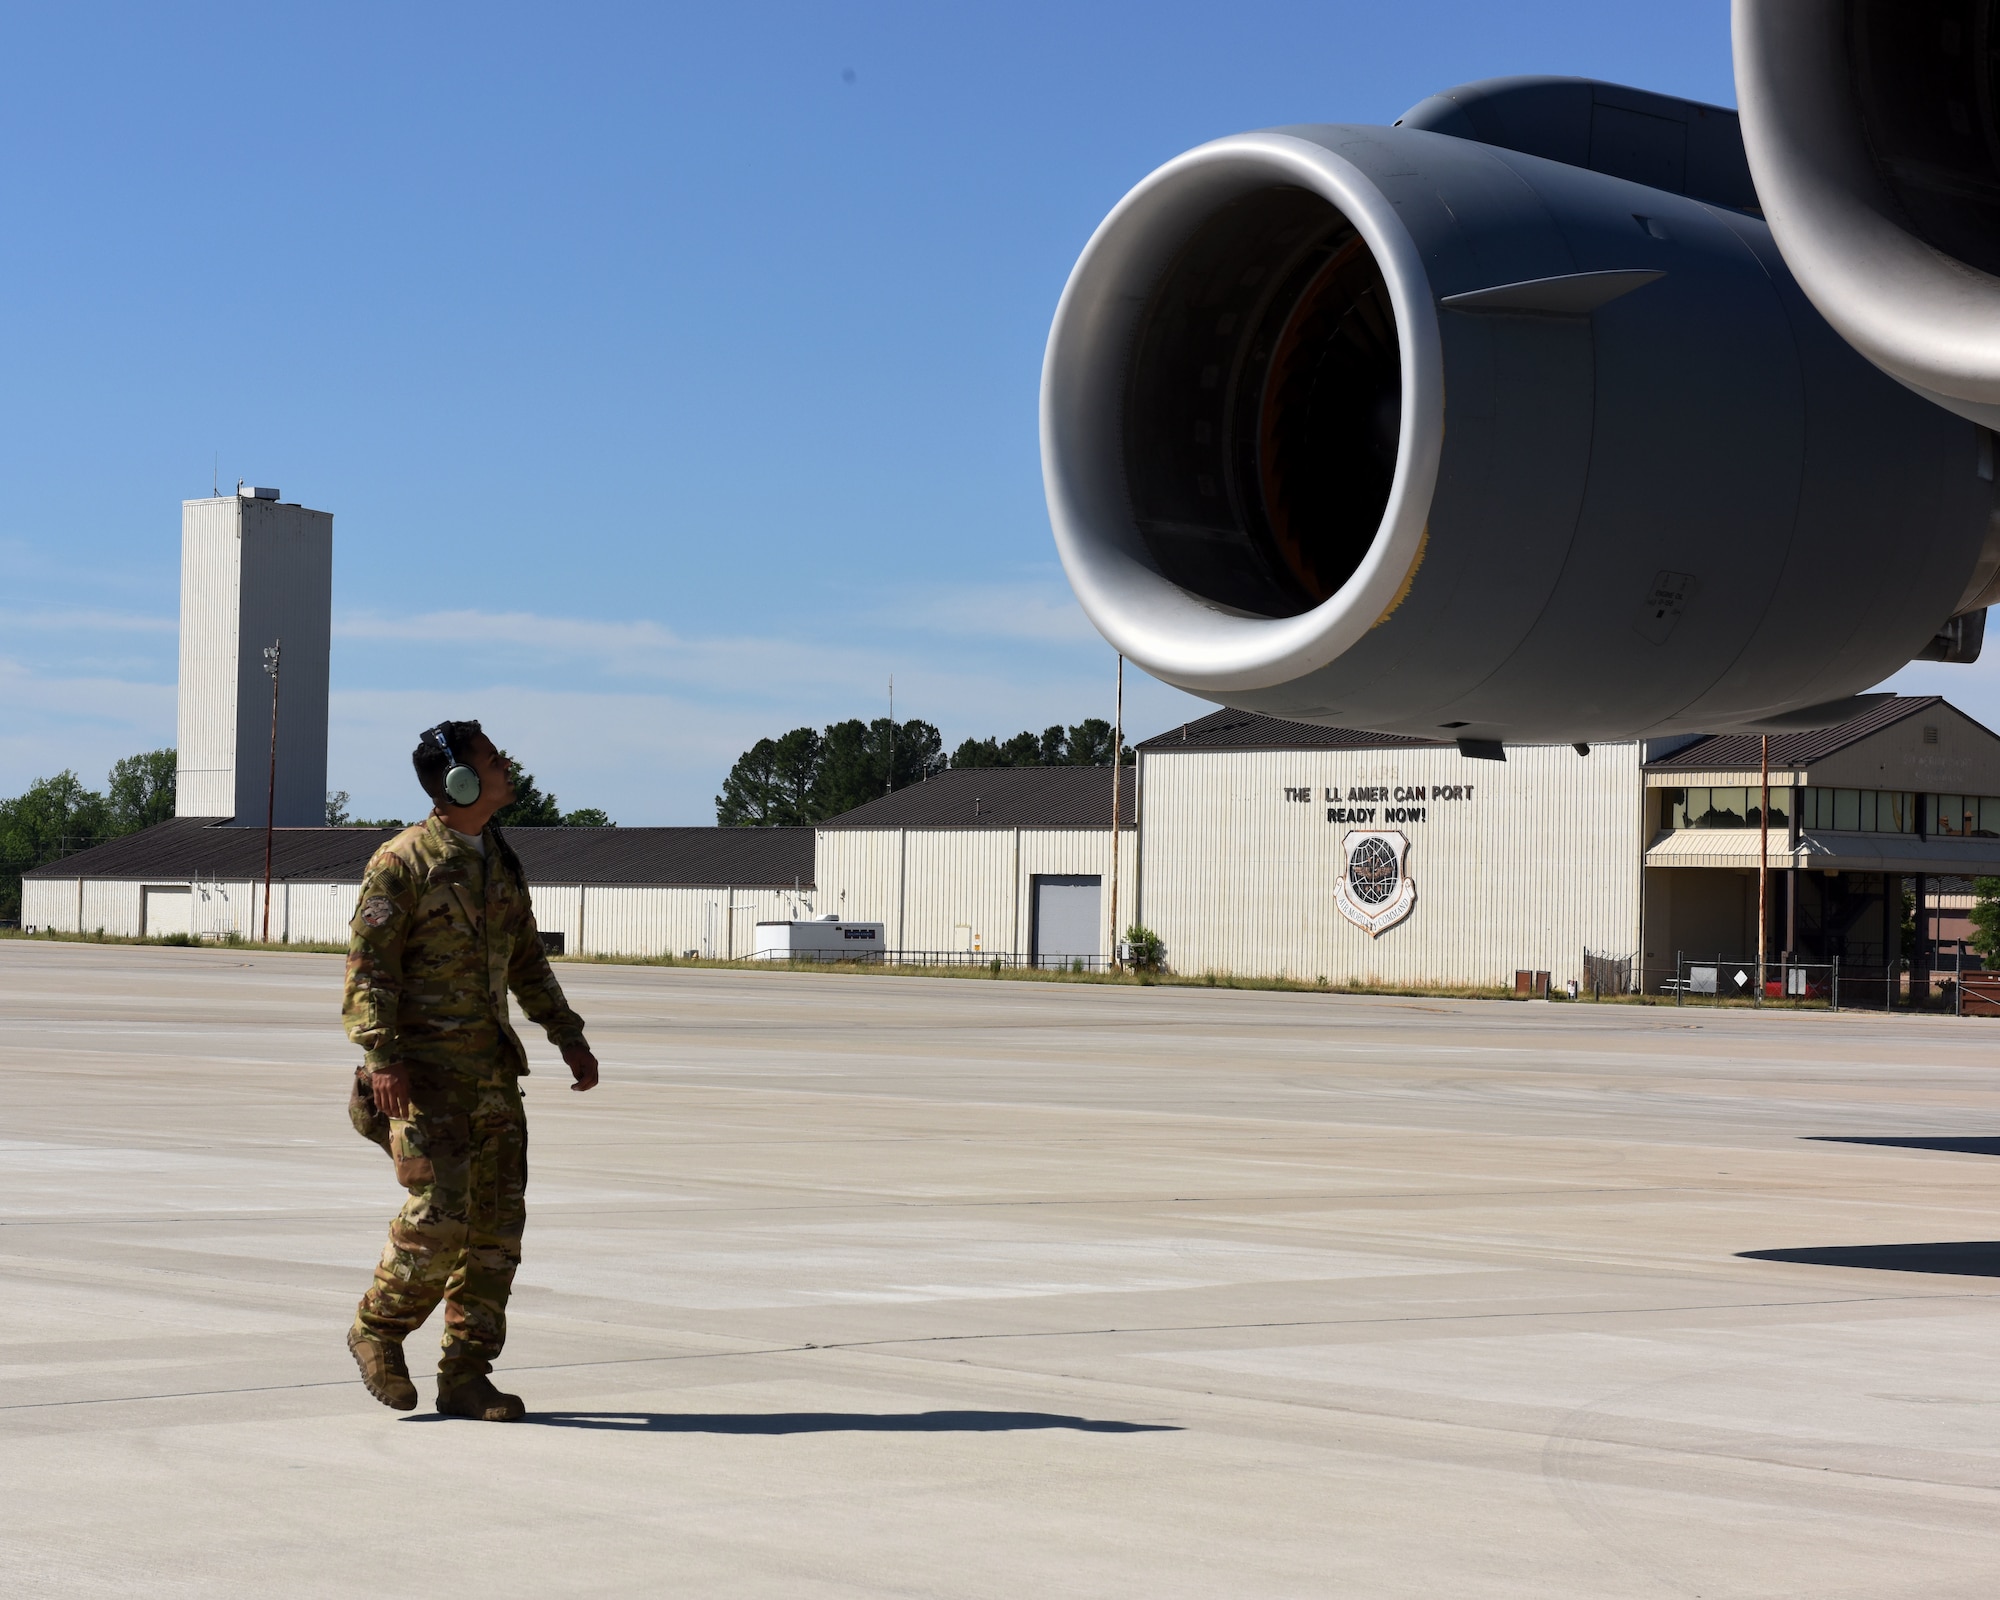 U.S. Air Force Staff Sgt. Andrew Torres-Cosme, 860th Aircraft Maintenance Squadron flying crew chief, checks the engines on a C-17 Globemaster III after landing May 21, 2019, at Pope Army Airfield, North Carolina. The C-17 is capable of rapid strategic delivery of troops and cargo anywhere in the world. (U.S. Air Force photo by 2nd Lt. R. Michael Longoria)